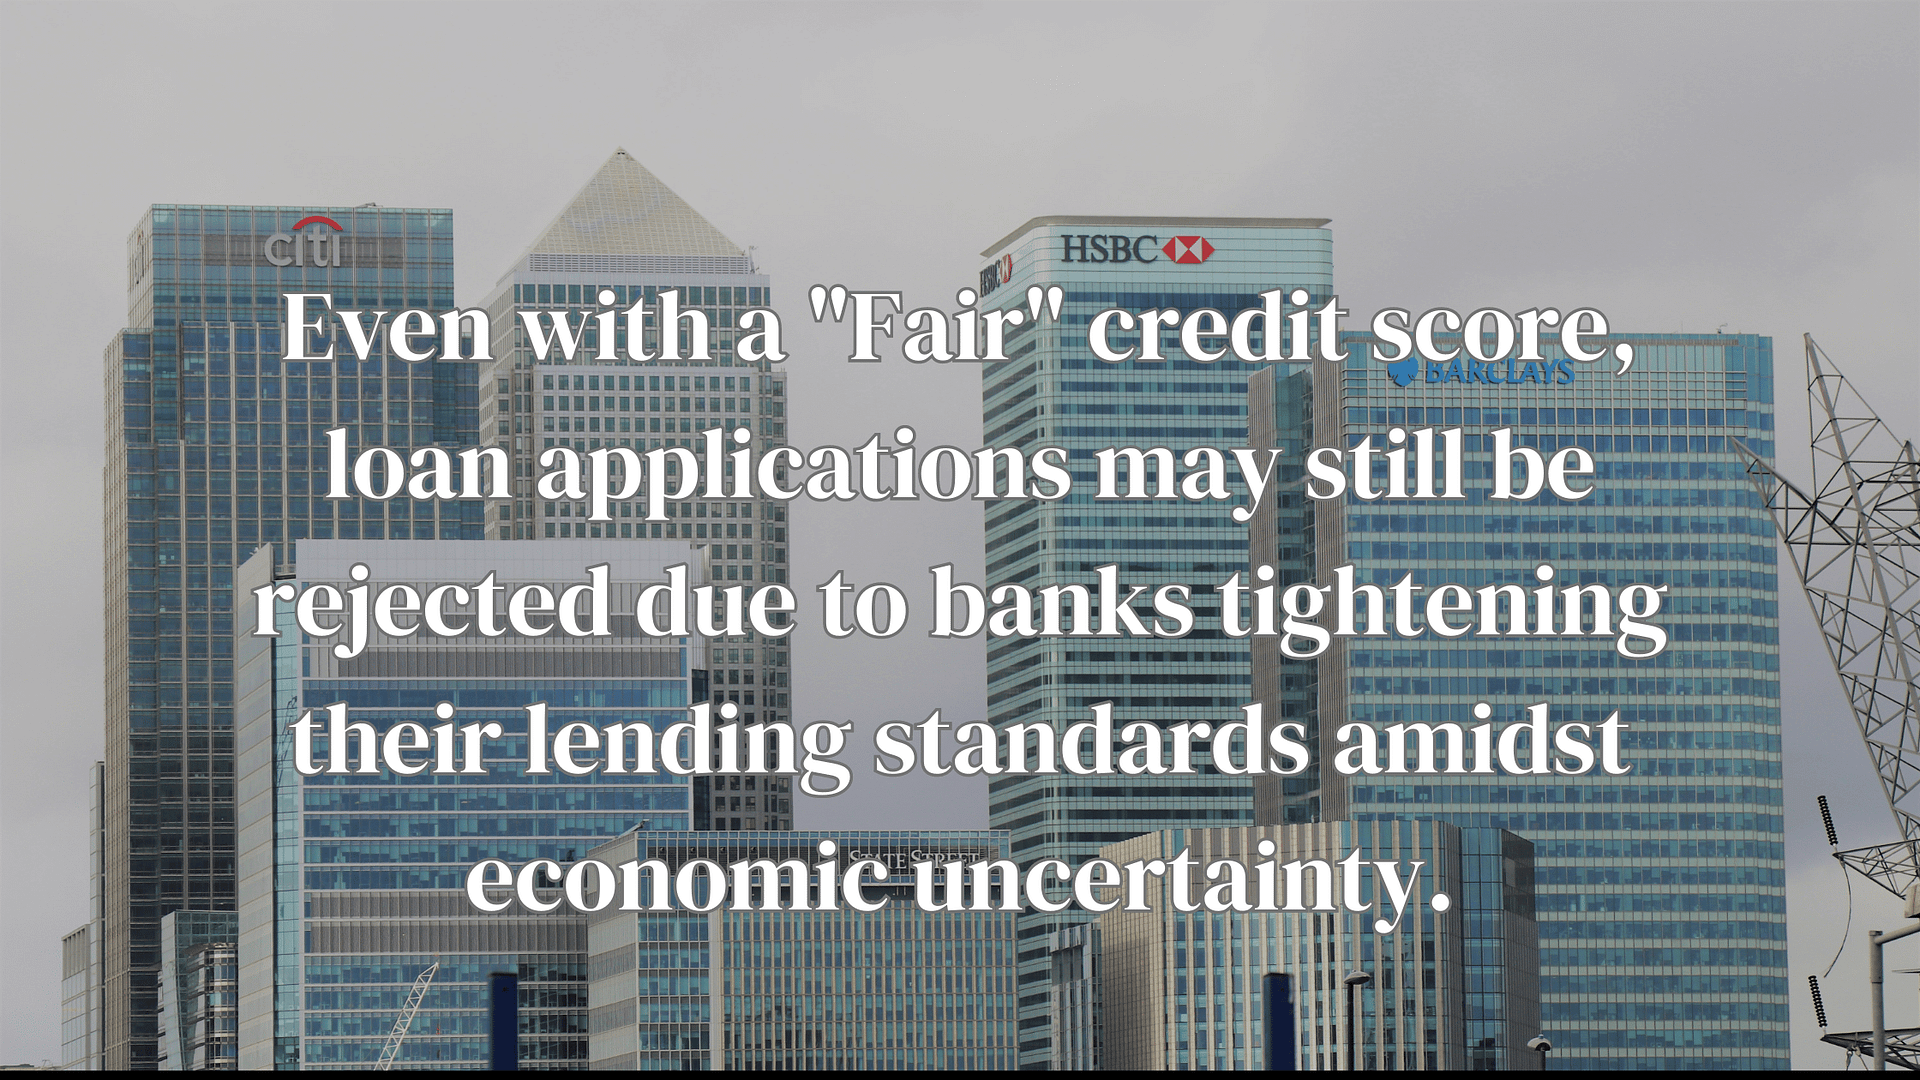 Even with a "Fair" credit score, loan applications may still be rejected due to banks tightening their lending standards amidst economic uncertainty.